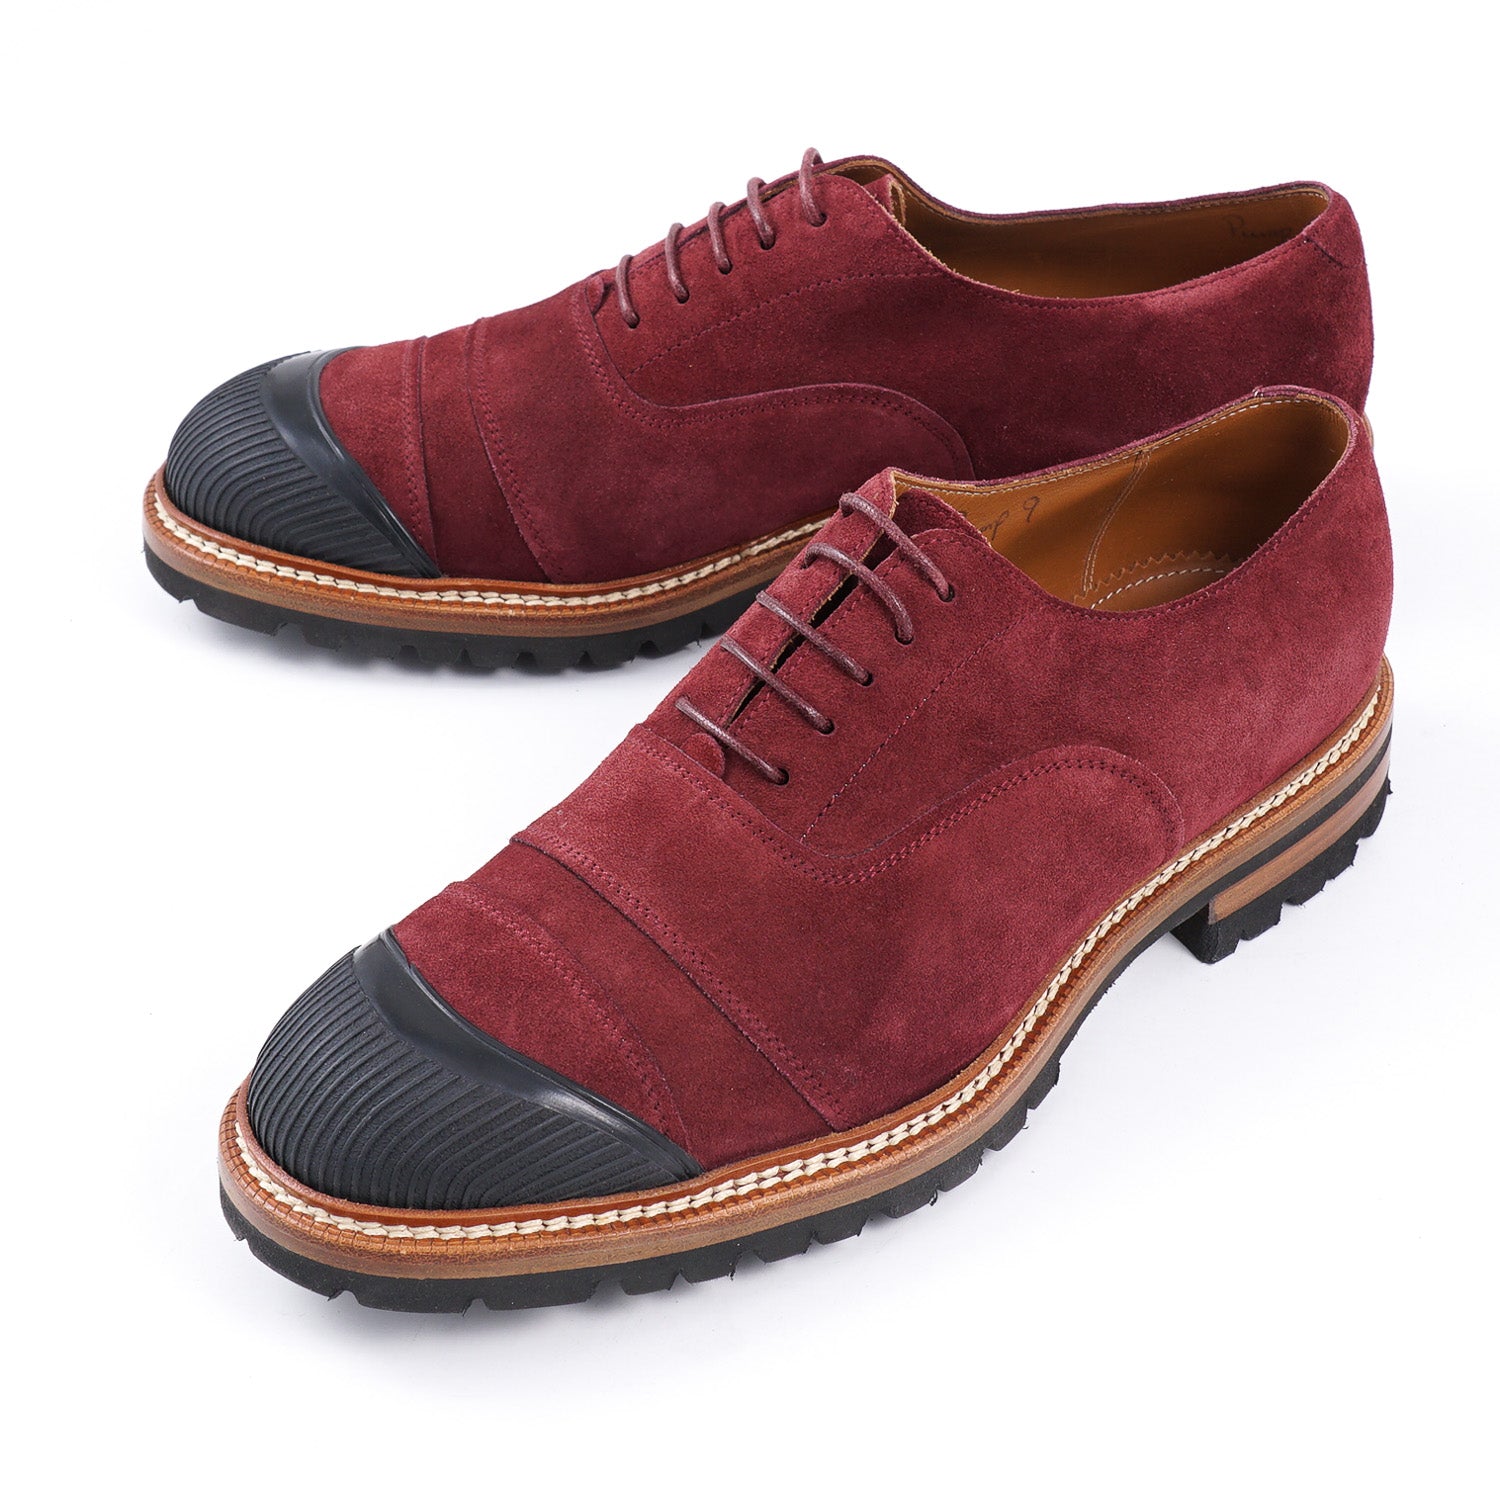 Kiton Storm-Welted Suede Oxford - Top Shelf Apparel